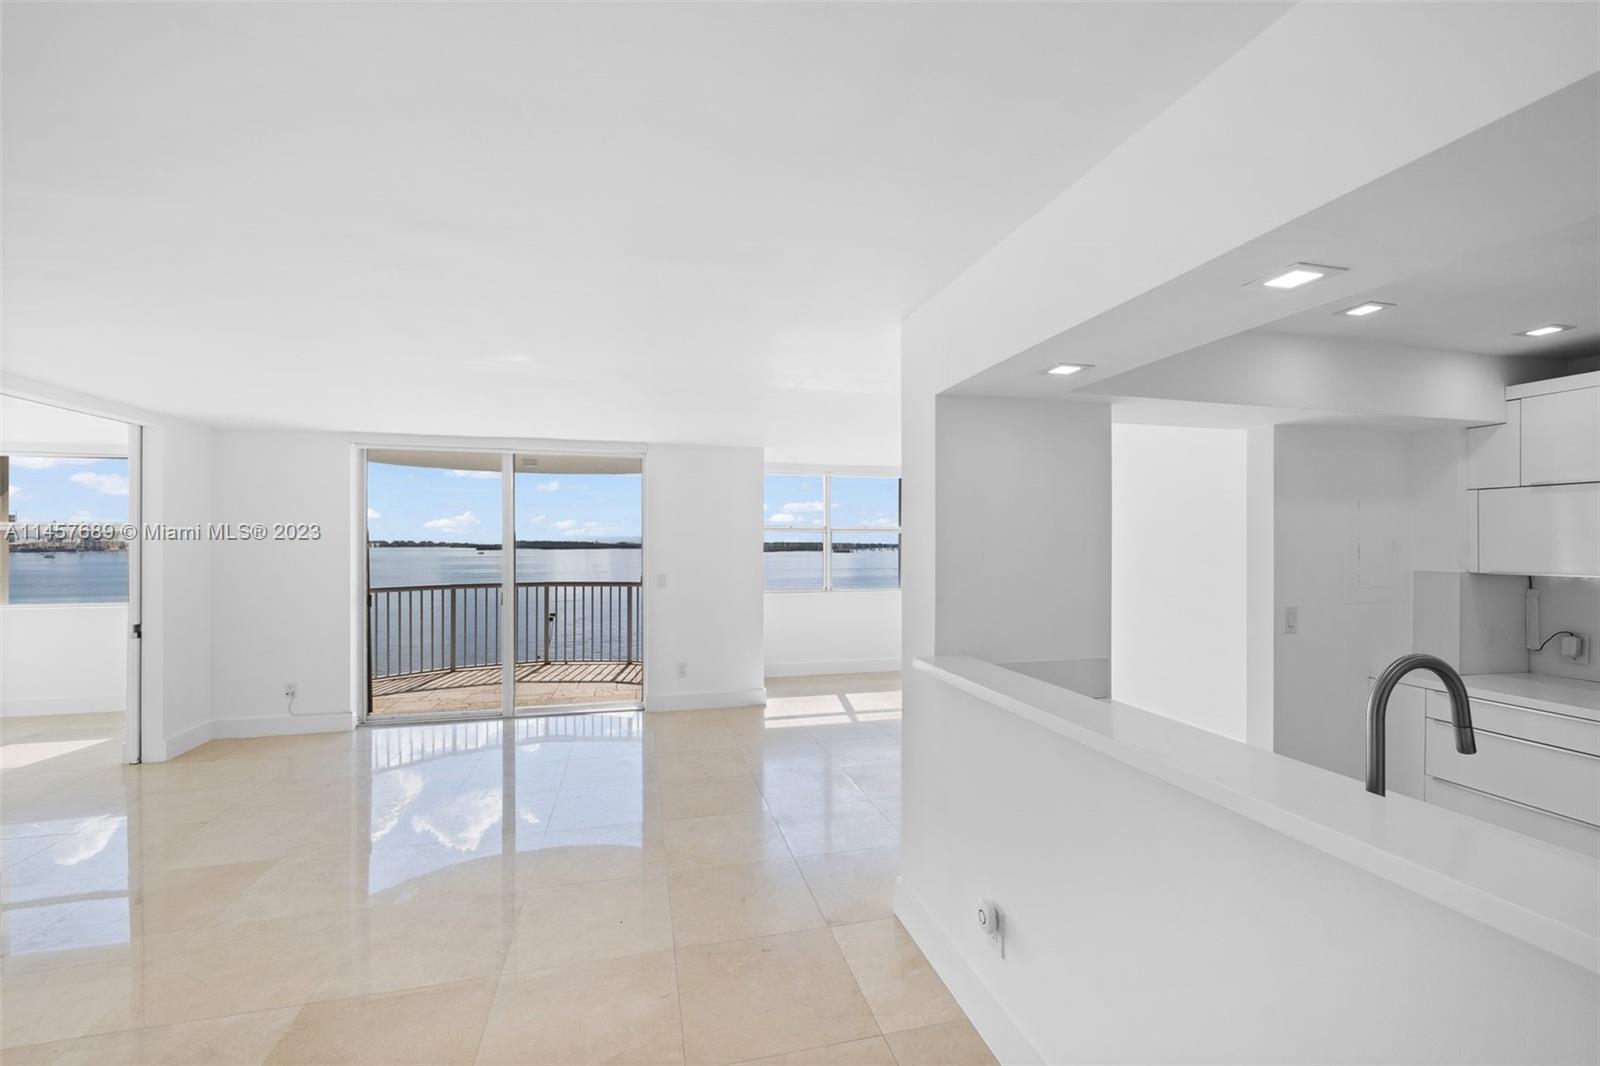 Captivating 3BR/2BA Corner Unit with Mesmerizing Biscayne Bay Views, gracing the 10th floor with awe-inspiring, unobstructed 180° vistas of the enchanting Biscayne Bay.
Luxury reigns supreme with meticulous upgrades, where elegant marvel floors grace your footsteps, and a thoroughly modernized kitchen showcases brand-new appliances.
An opulent master suite awaits, offering dual sinks, roomy walk-in closets, and an indulgent en-suite bathroom. Two additional bedrooms and another full bathroom complete this thoughtfully designed layout.

Of particular note, this unit boasts the prized inclusion of not one, but two assigned parking spaces, a truly rare find in this highly sought-after locale.